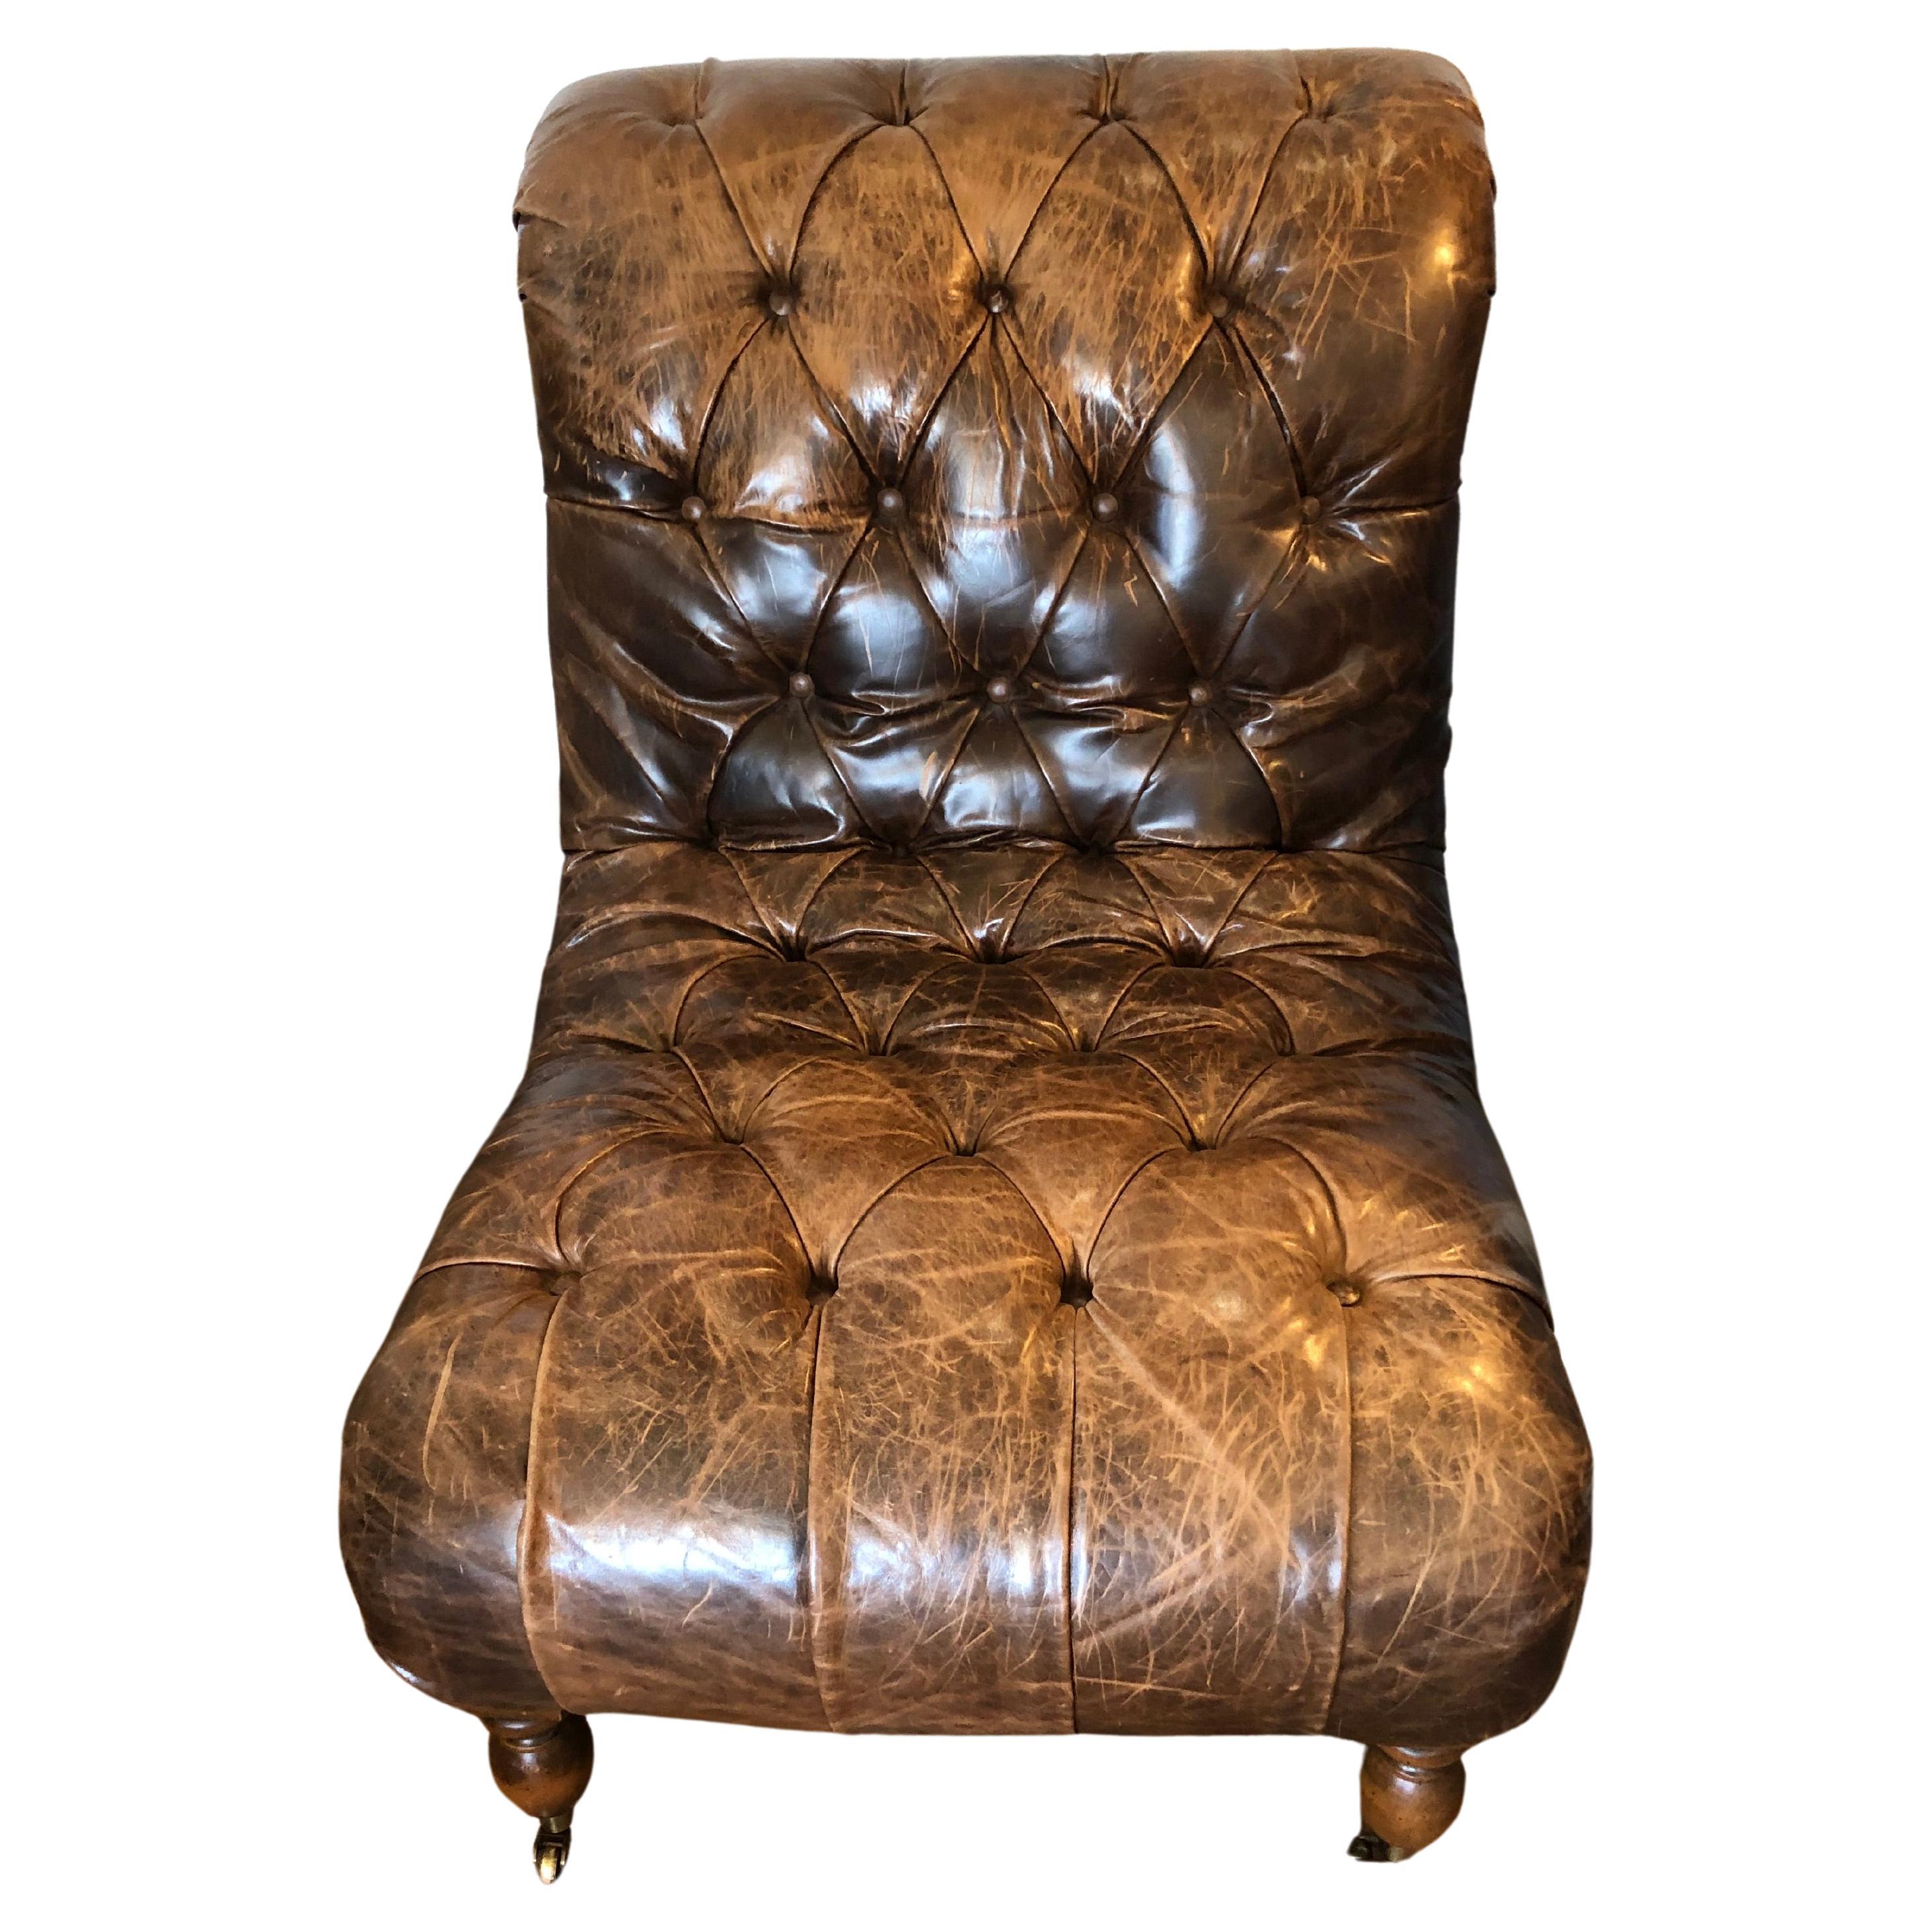 Handsome pair of distressed tobacco brown tufted leather club chairs having no arms in a slipper chair silouette.  Super comfy and stylish.